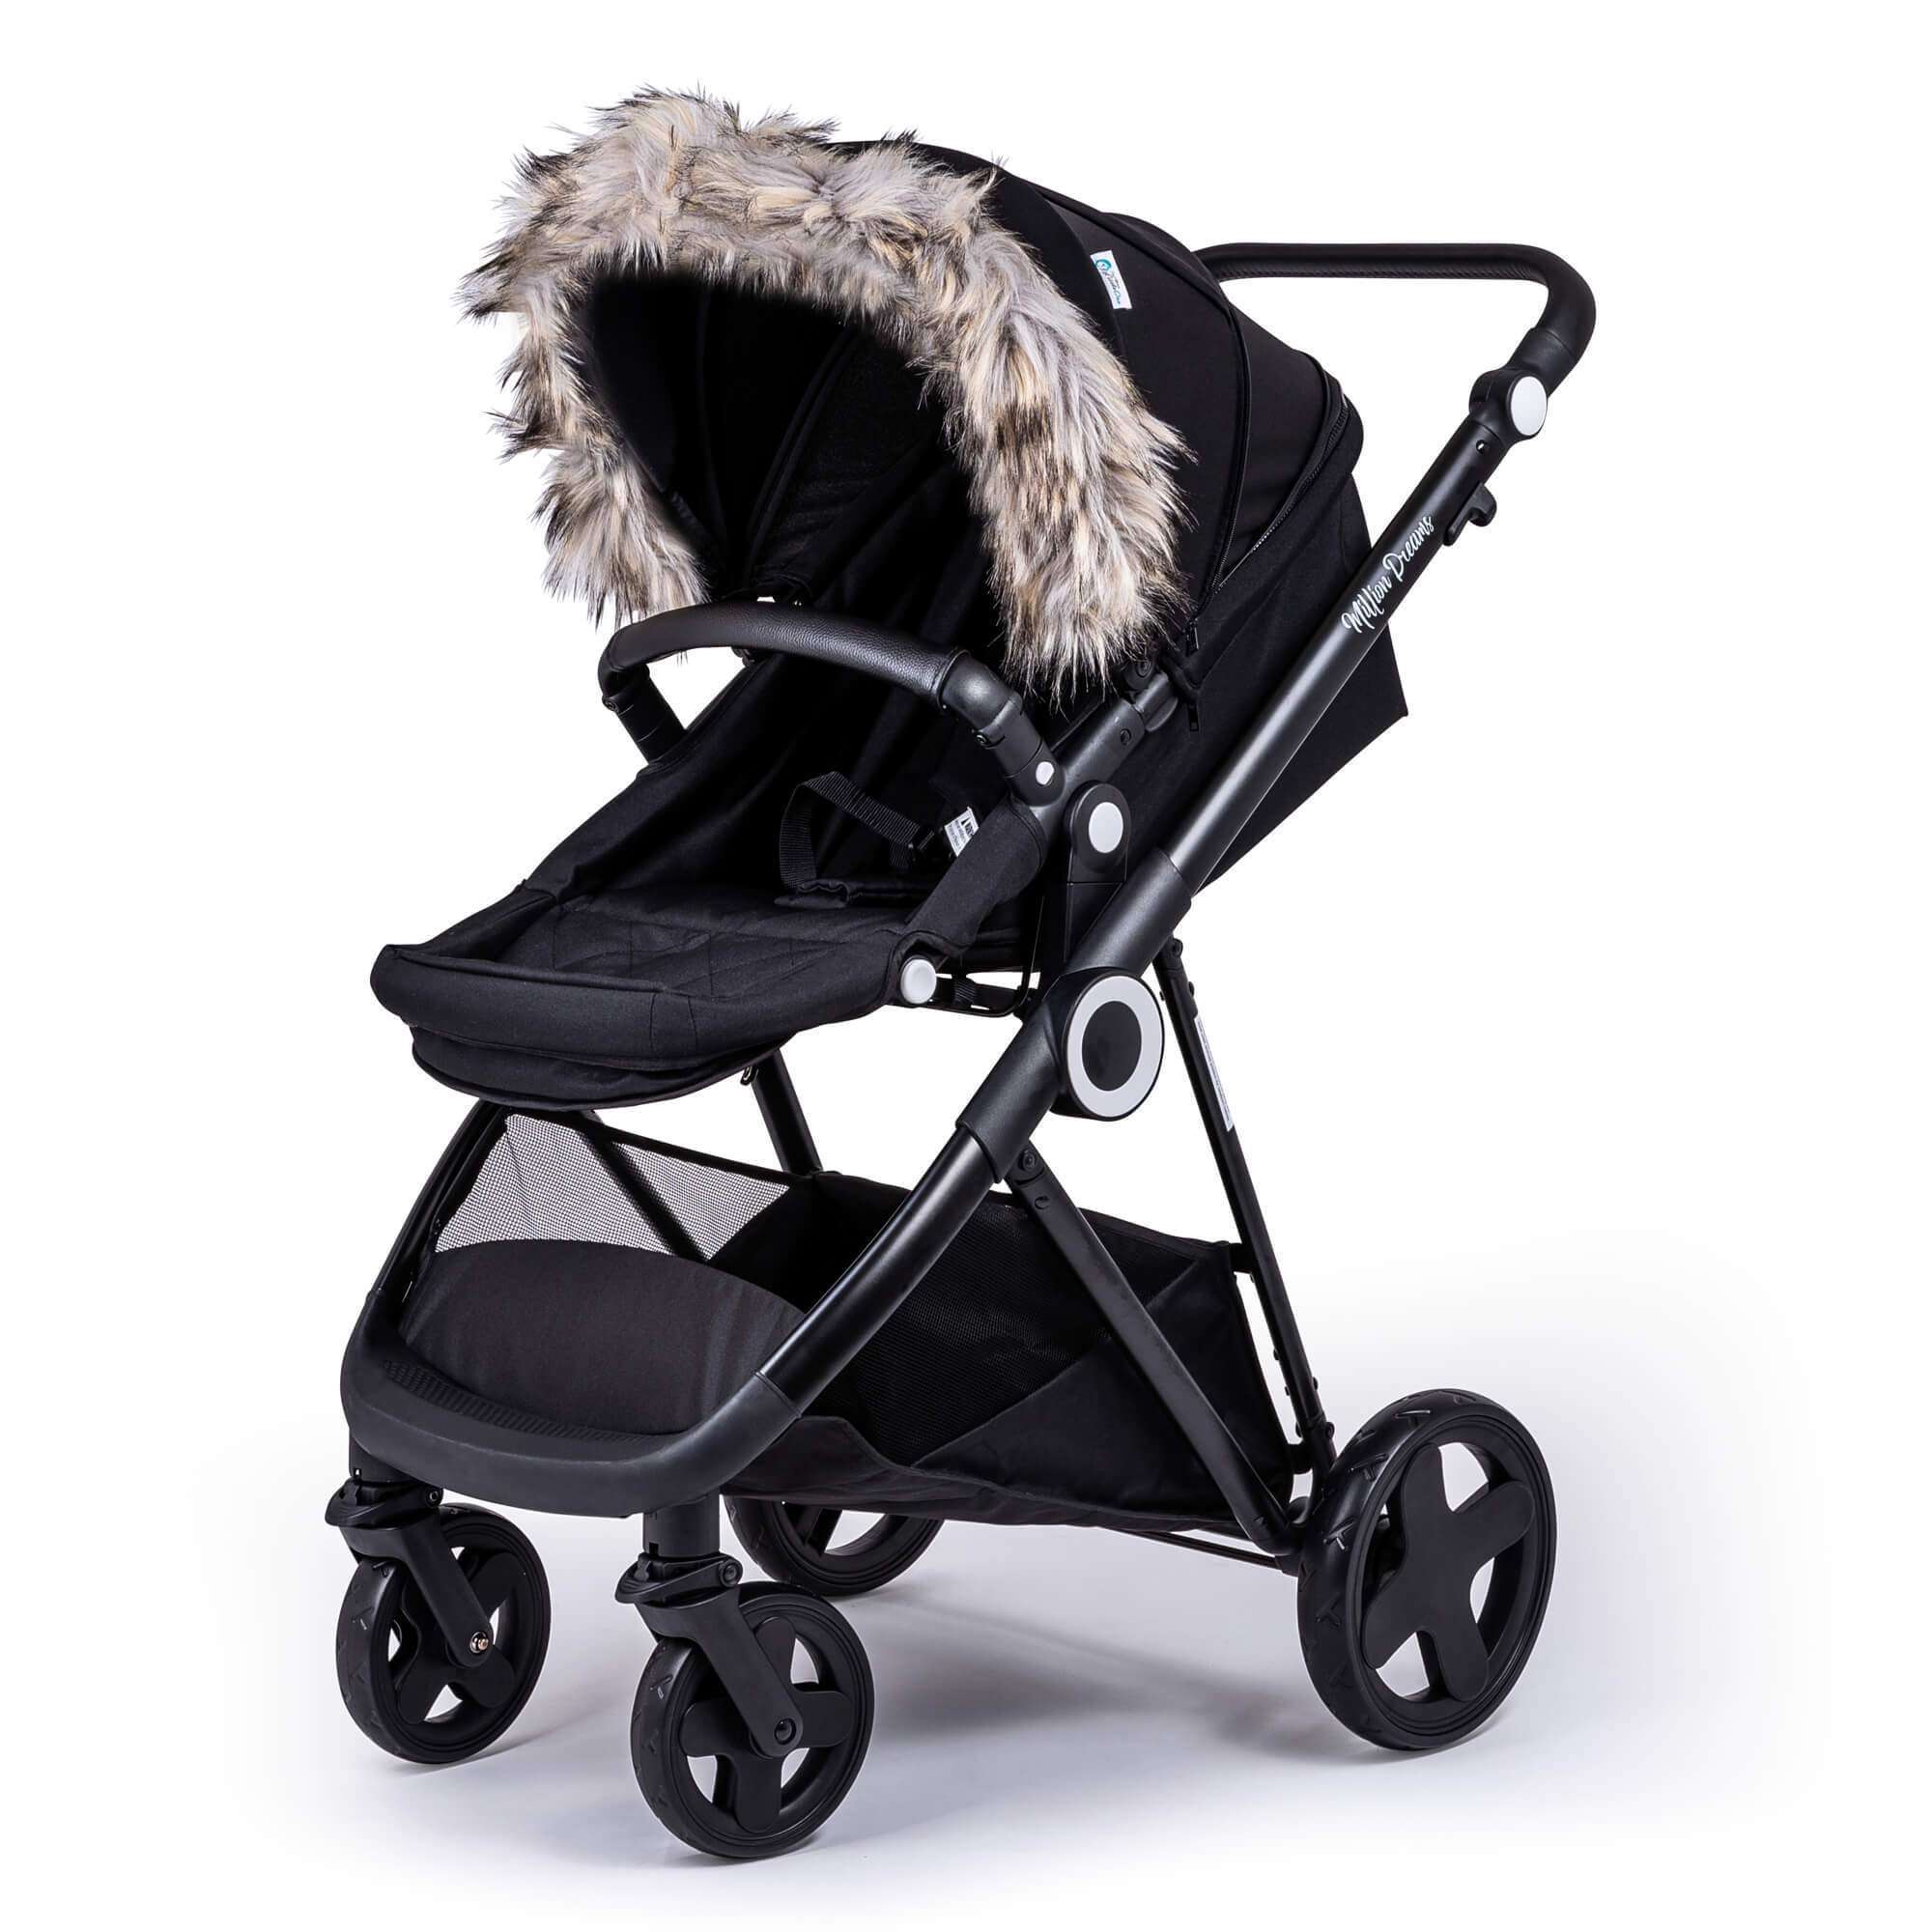 Pram Fur Hood Trim Attachment for Pushchair Compatible with Little Shield - For Your Little One